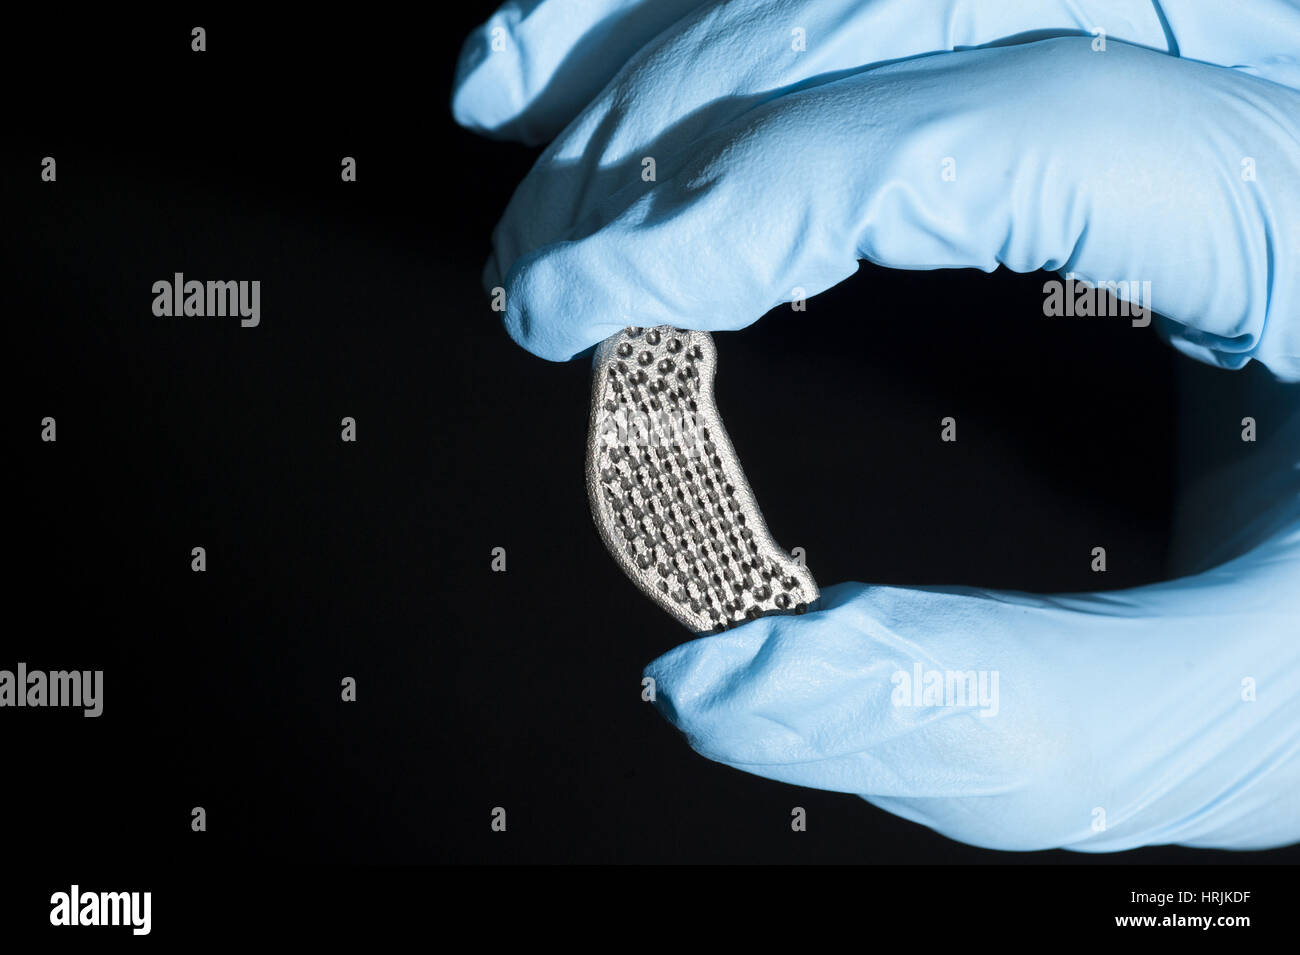 3-D Printed Spinal Disc, 2015 Stock Photo